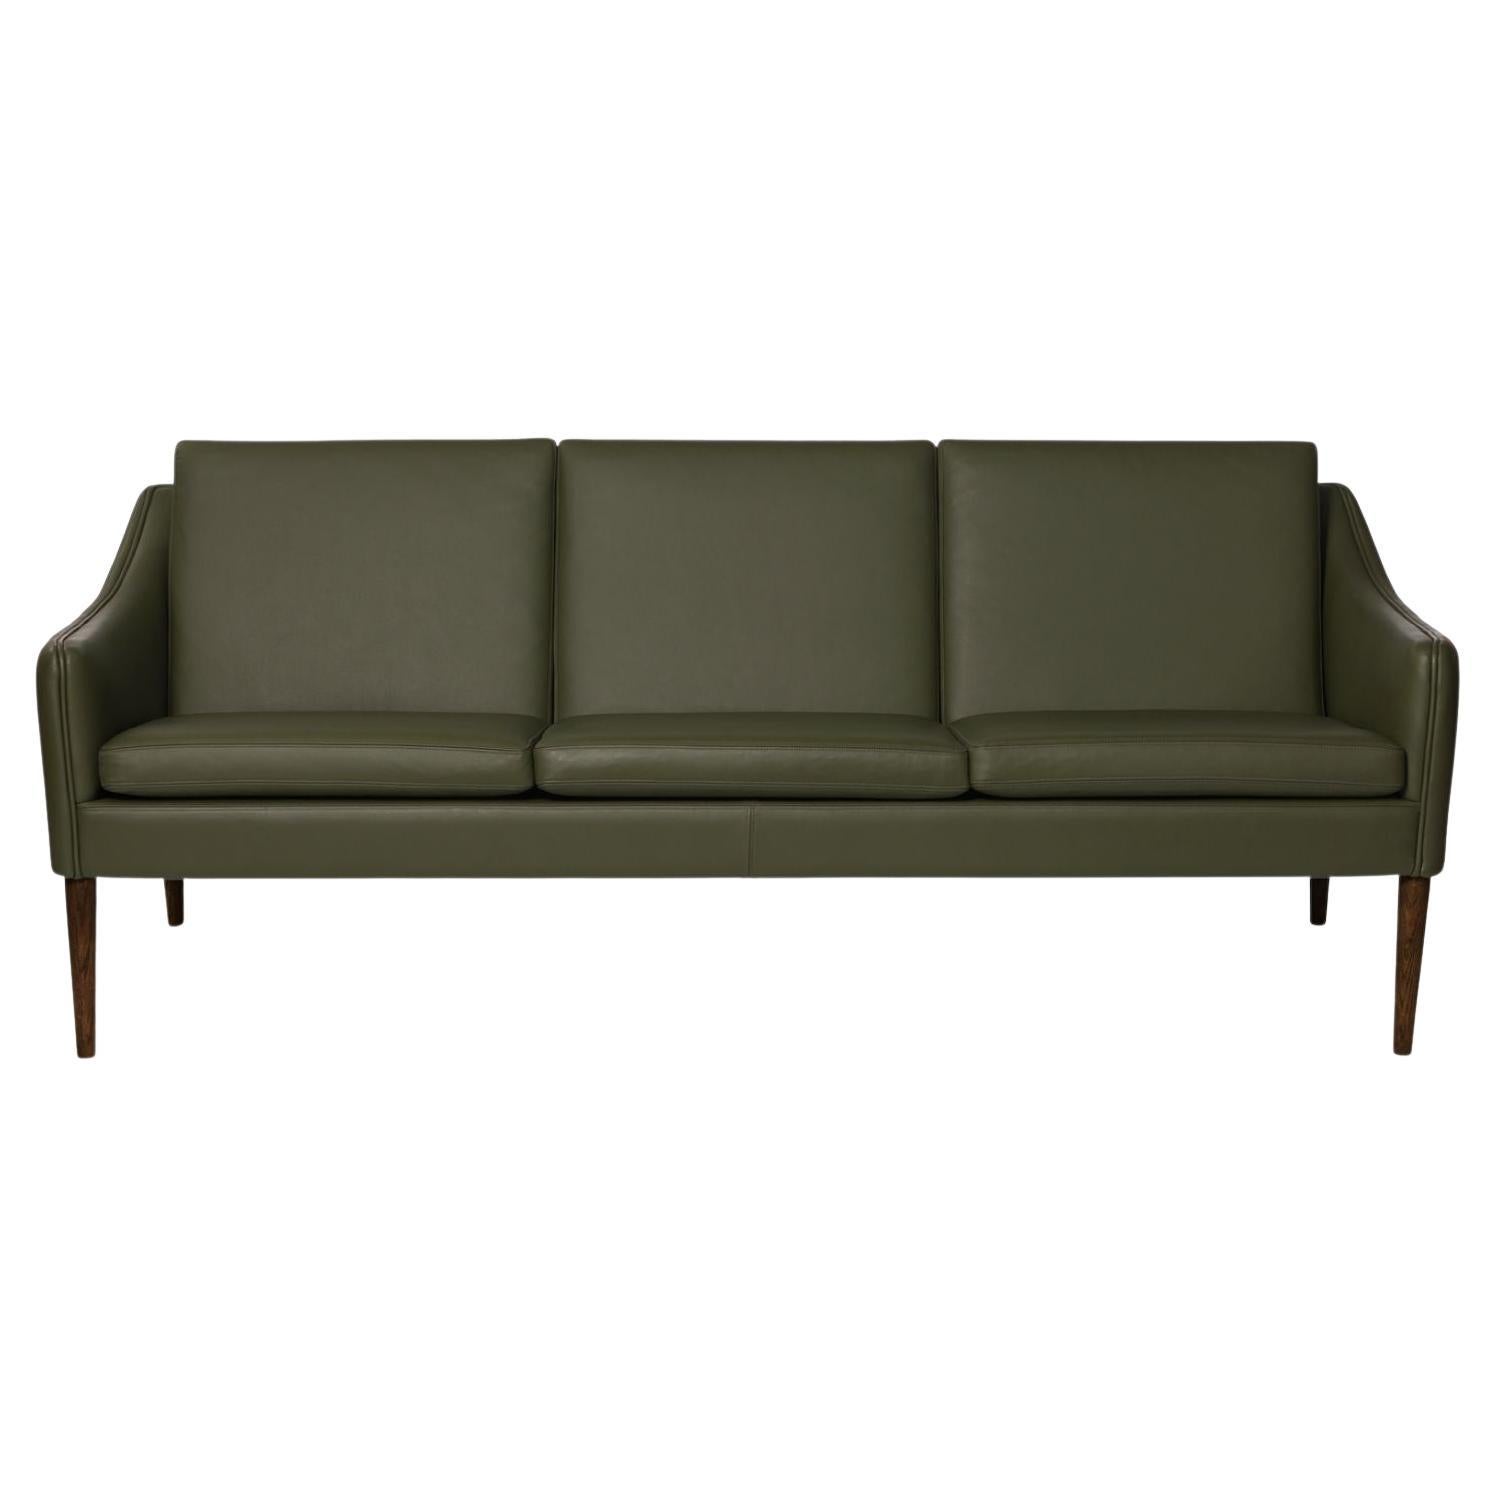 Mr Olsen 3 Seater Walnut Challenger Pickle Green Leather by Warm Nordic For Sale